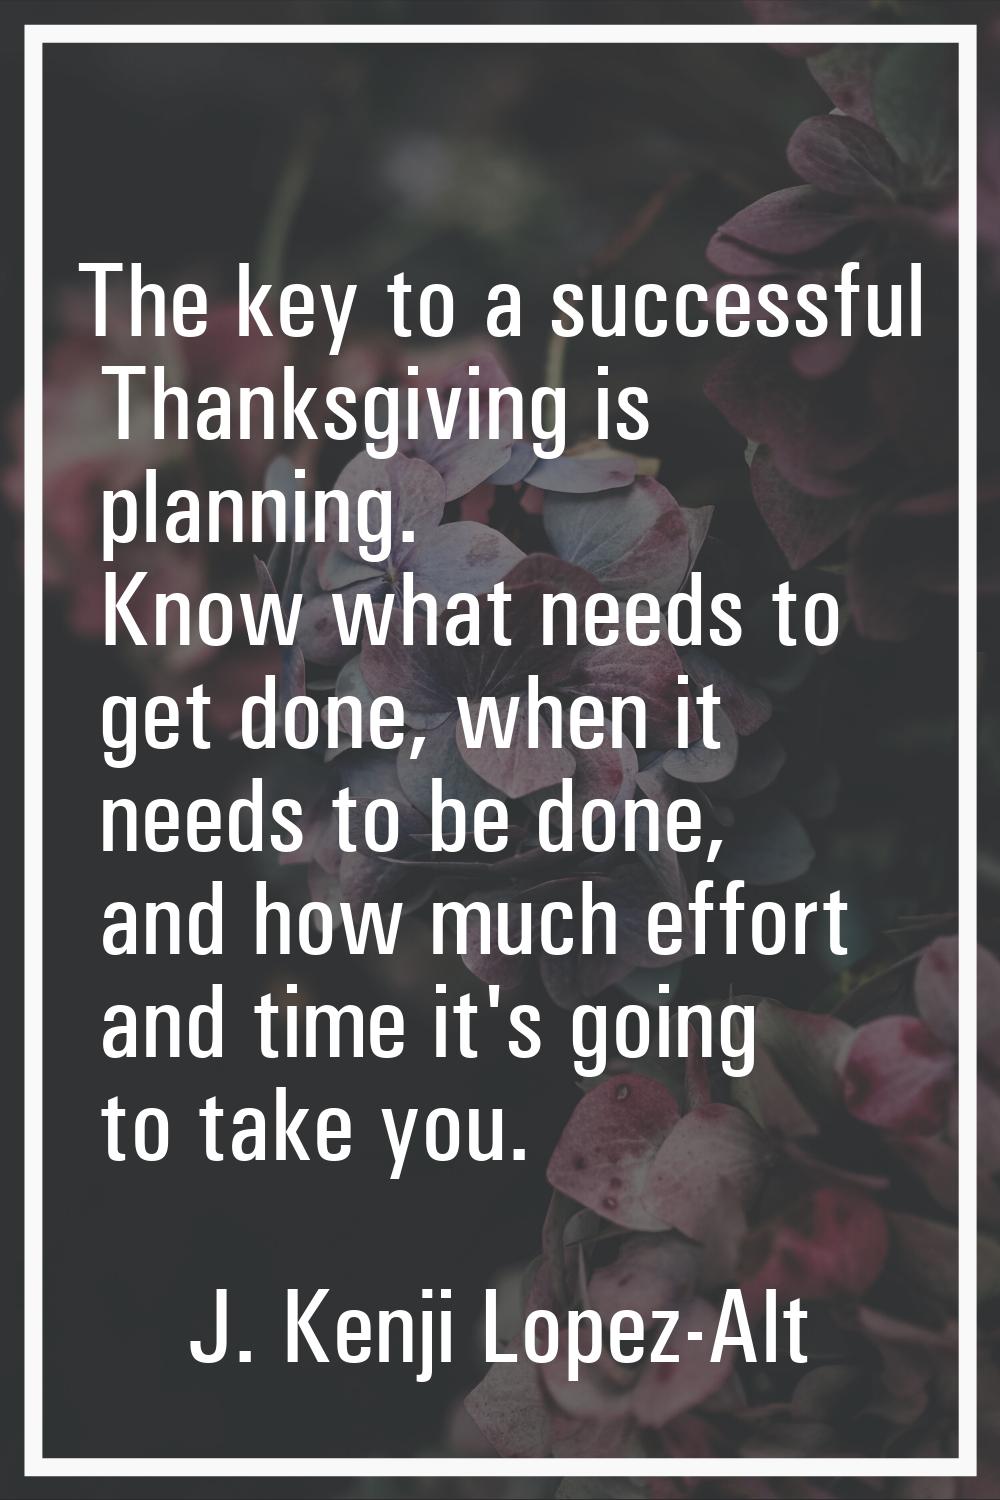 The key to a successful Thanksgiving is planning. Know what needs to get done, when it needs to be 